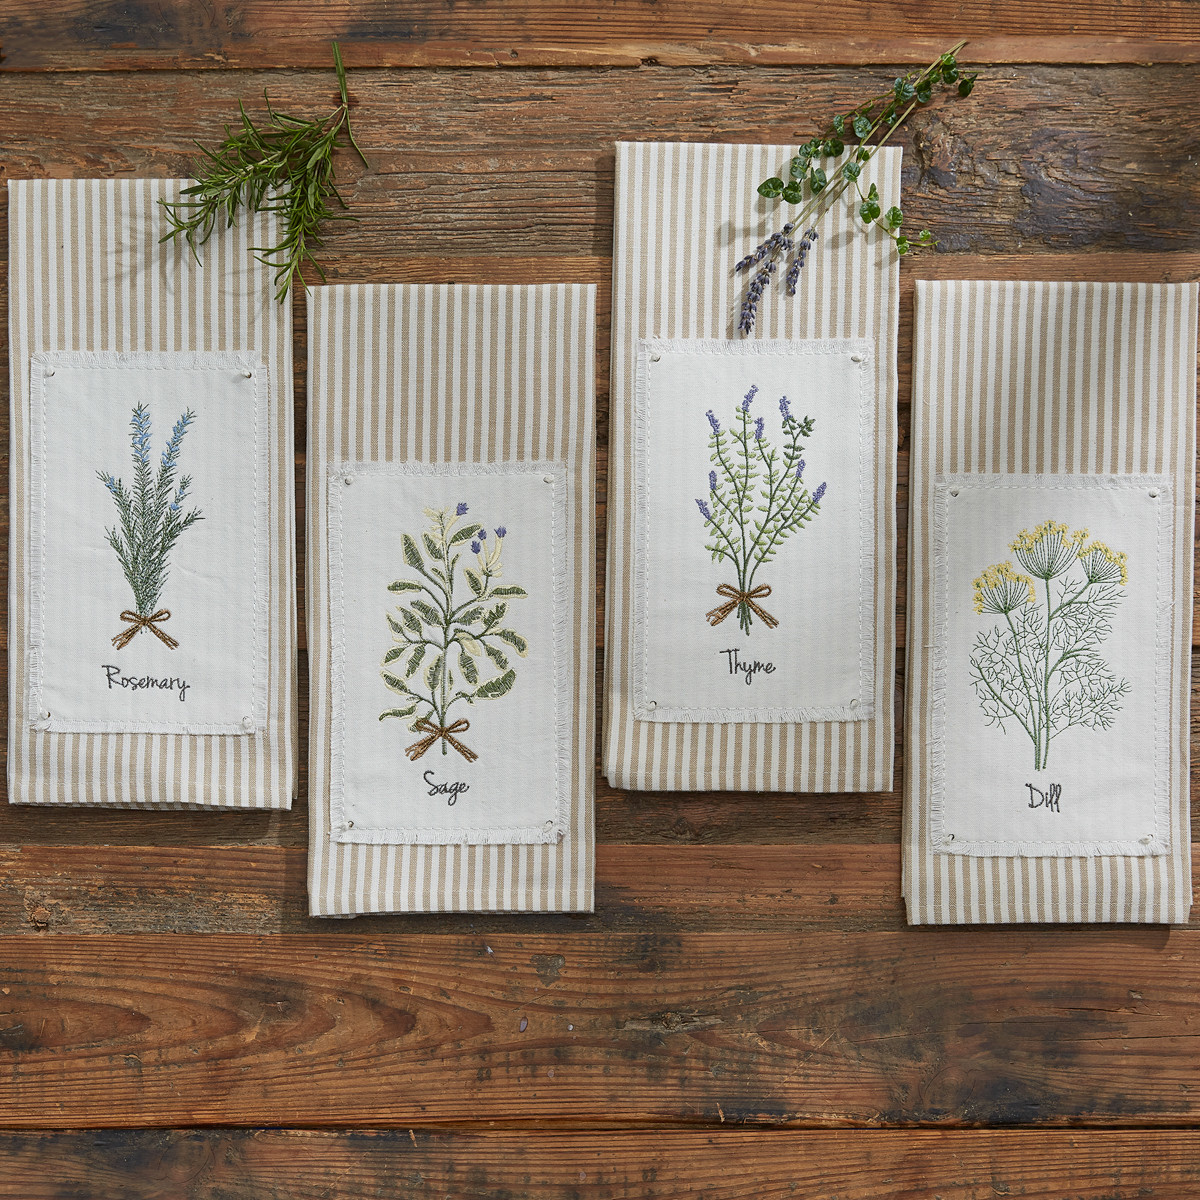 https://www.thecabinshop.com/media/catalog/product/h/e/herbs-embroidered-kitchen-towels.jpg